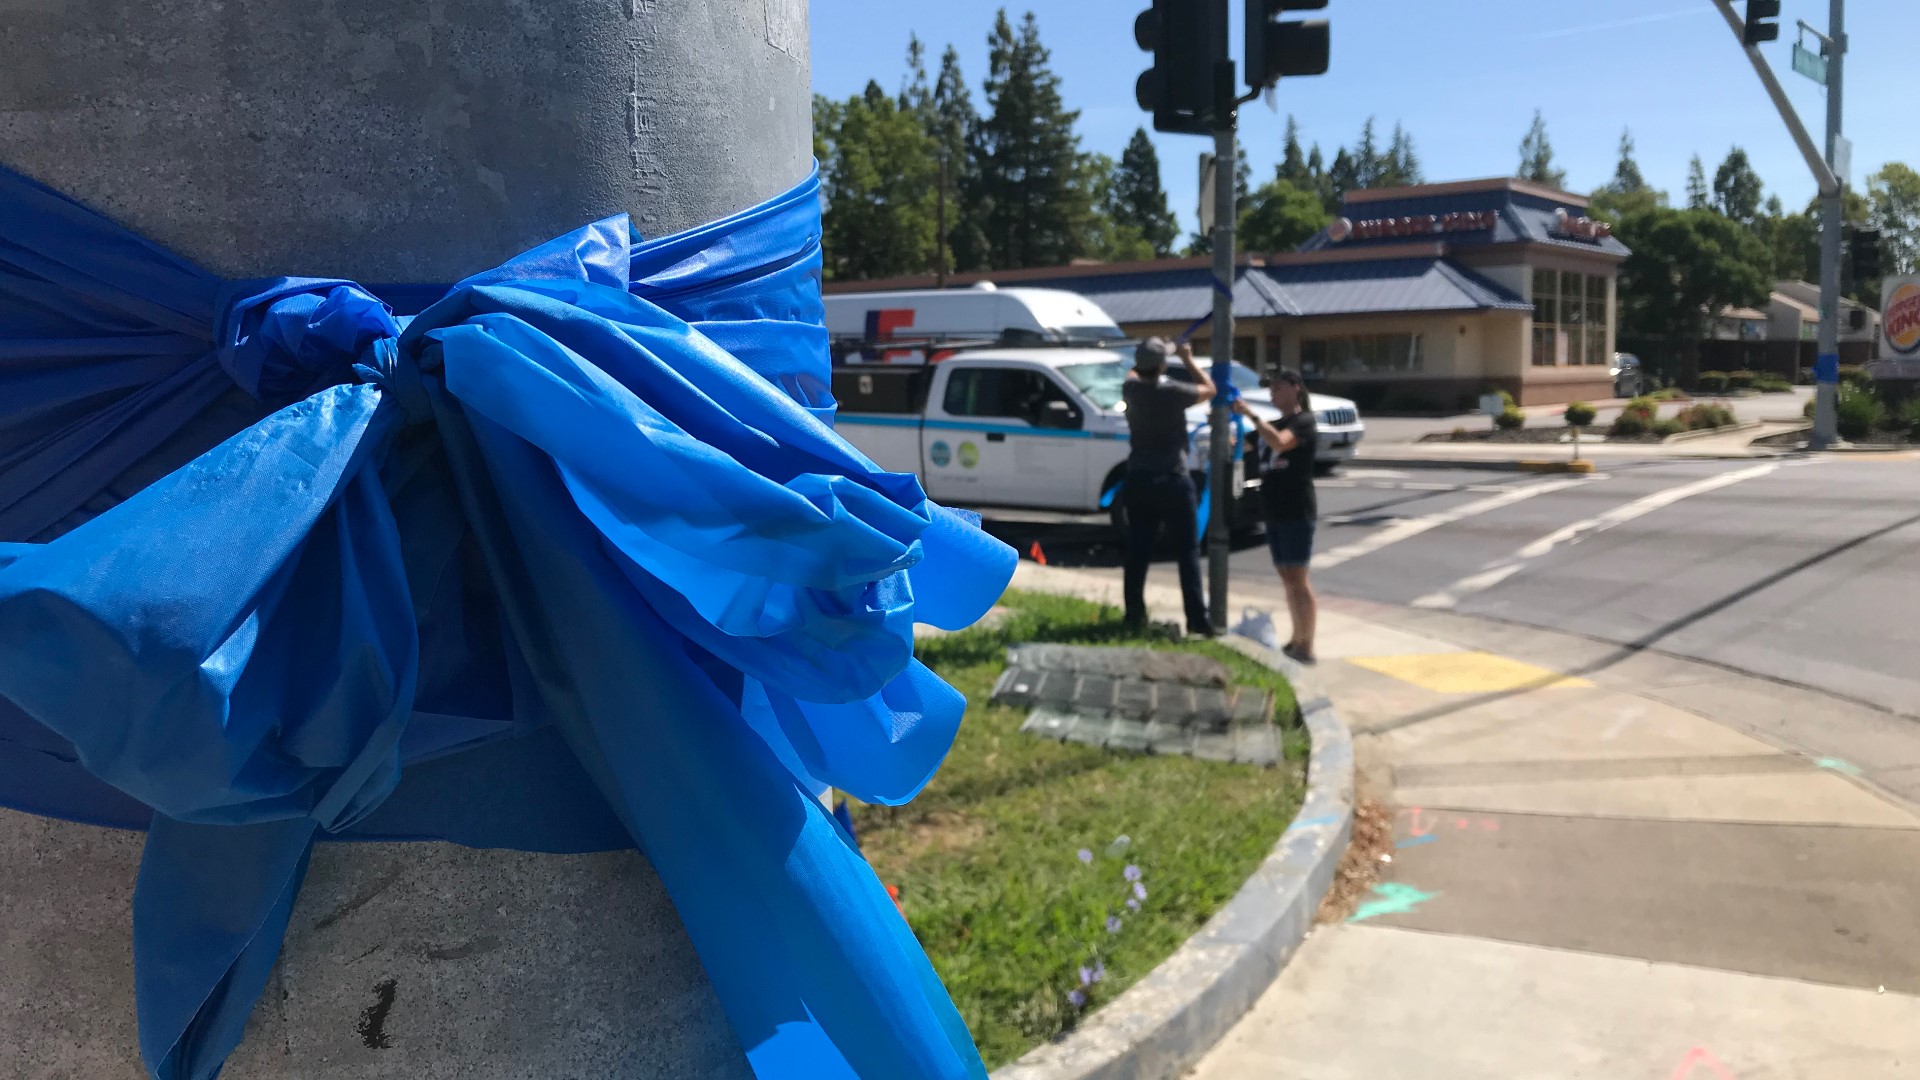 Carole Peak and Sheri Blanco were two of the 40 volunteers who went around placing blue ribbons on street lights, trees, and fences in memory of Officer O’Sullivan.